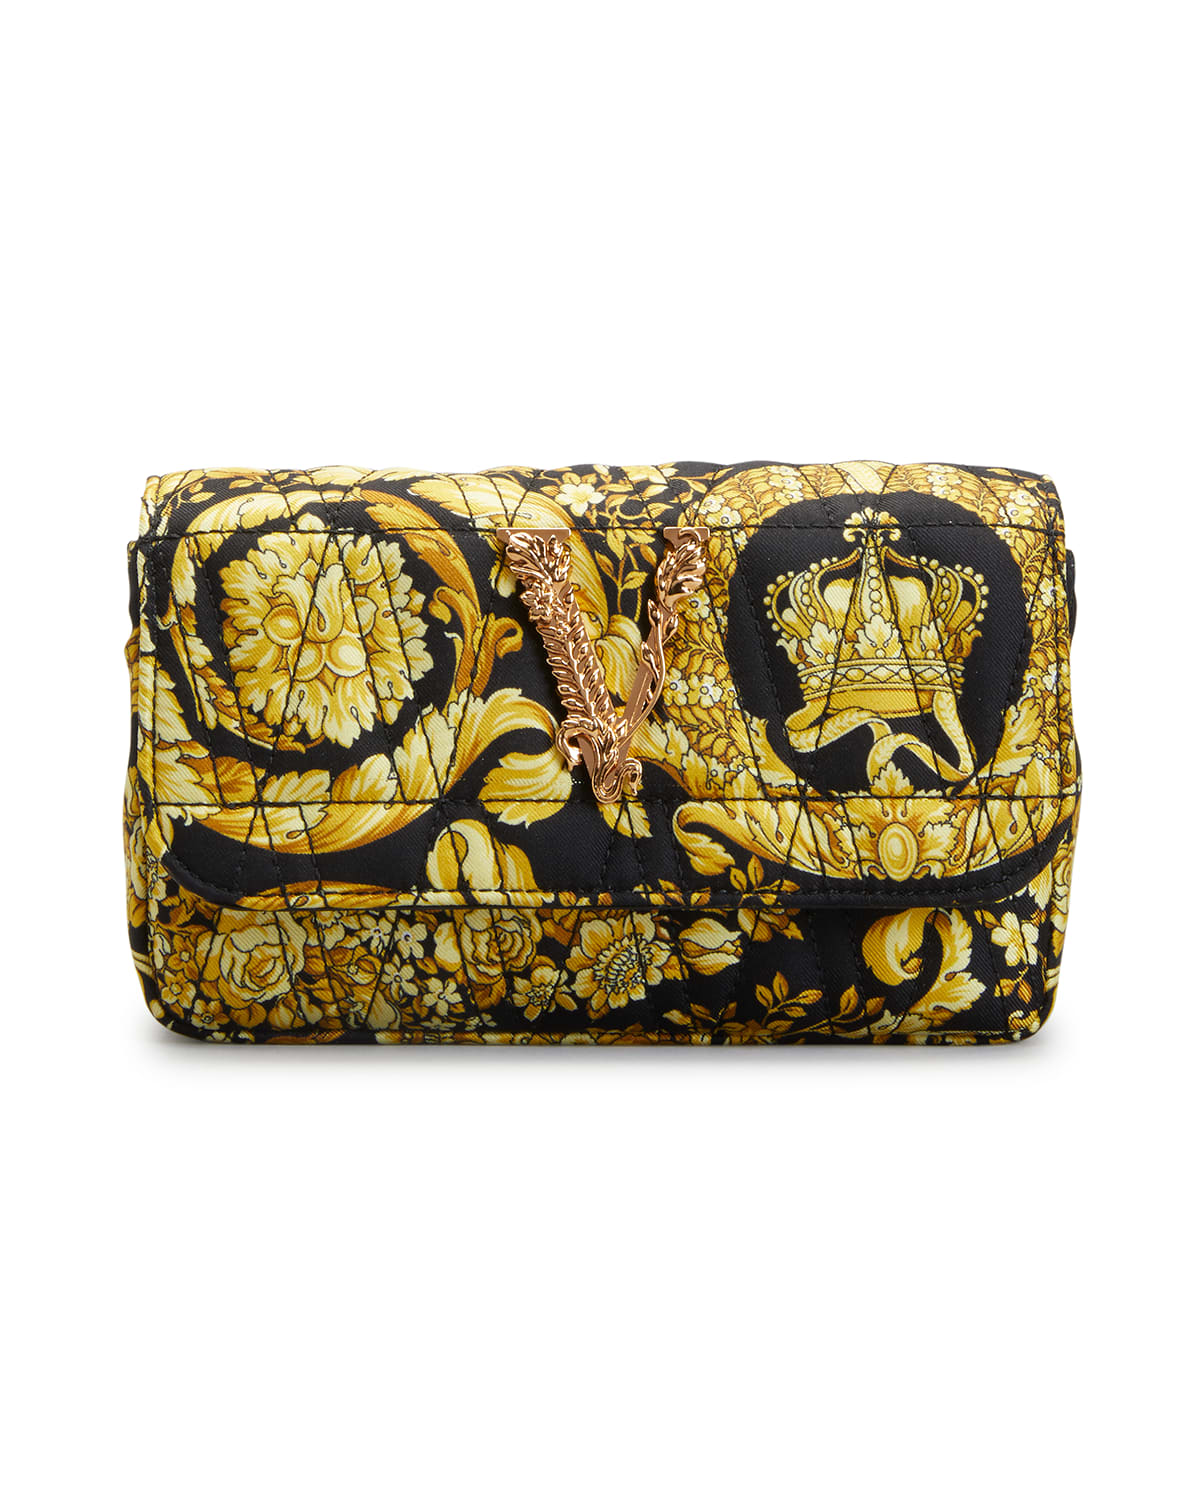 Versace Virtus Barocco Quilted Evening Clutch Bag In Black/yell